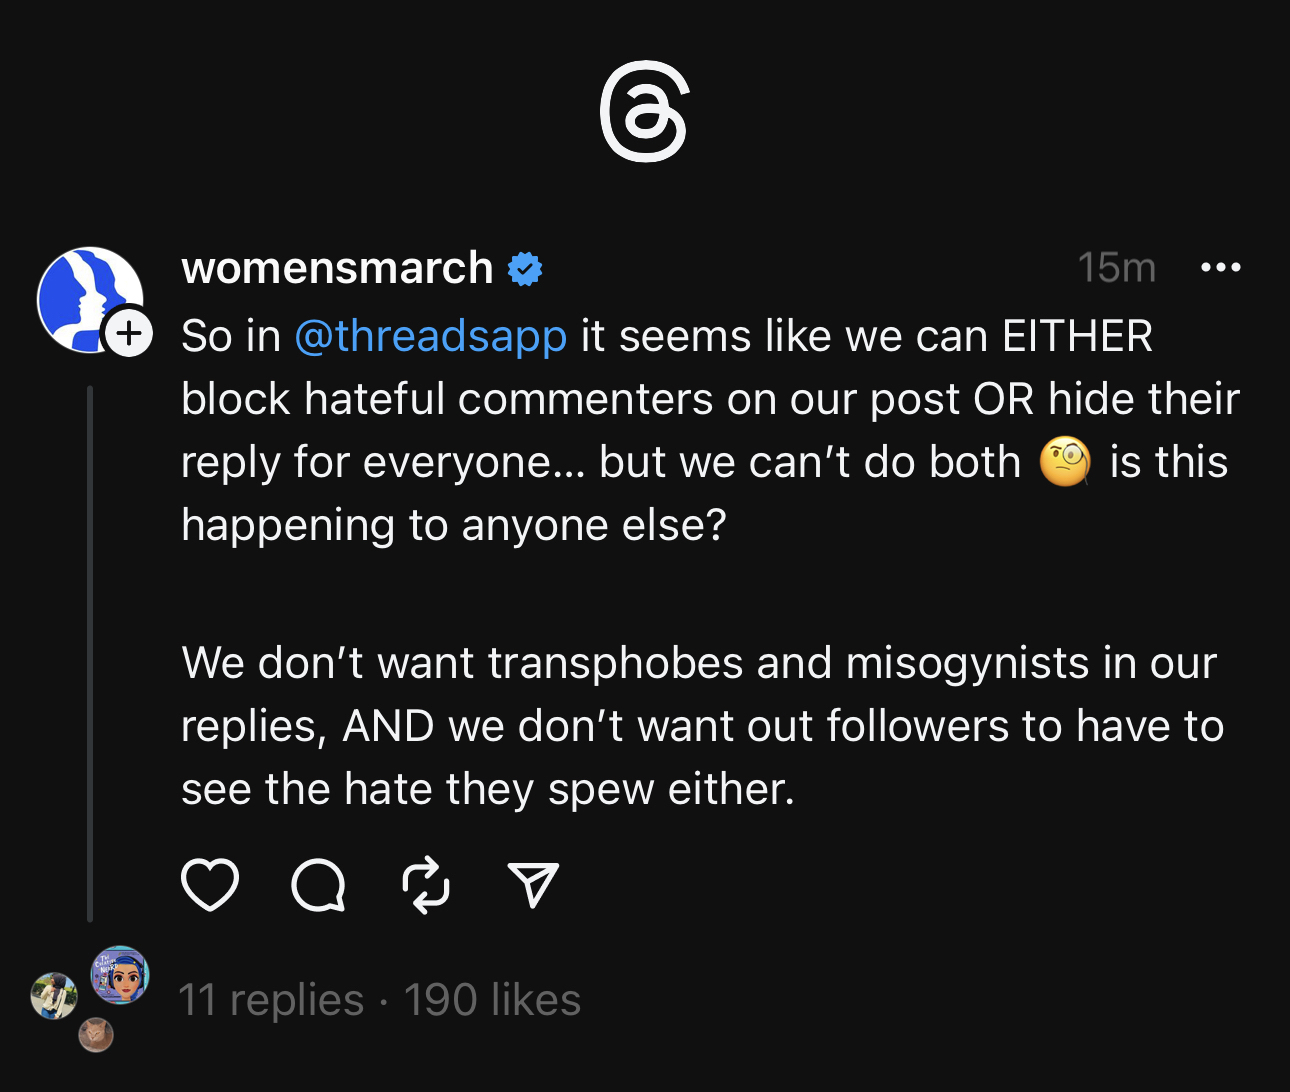 Threads screen shot - So in @threadsapp it seems like we can EITHER block hateful commenters on our post OR hide their reply for everyone... but we can't do both is this happening to anyone else?&10;We don't want transphobes and misogynists in our replies, AND we don't want out followers to have to see the hate they spew either.